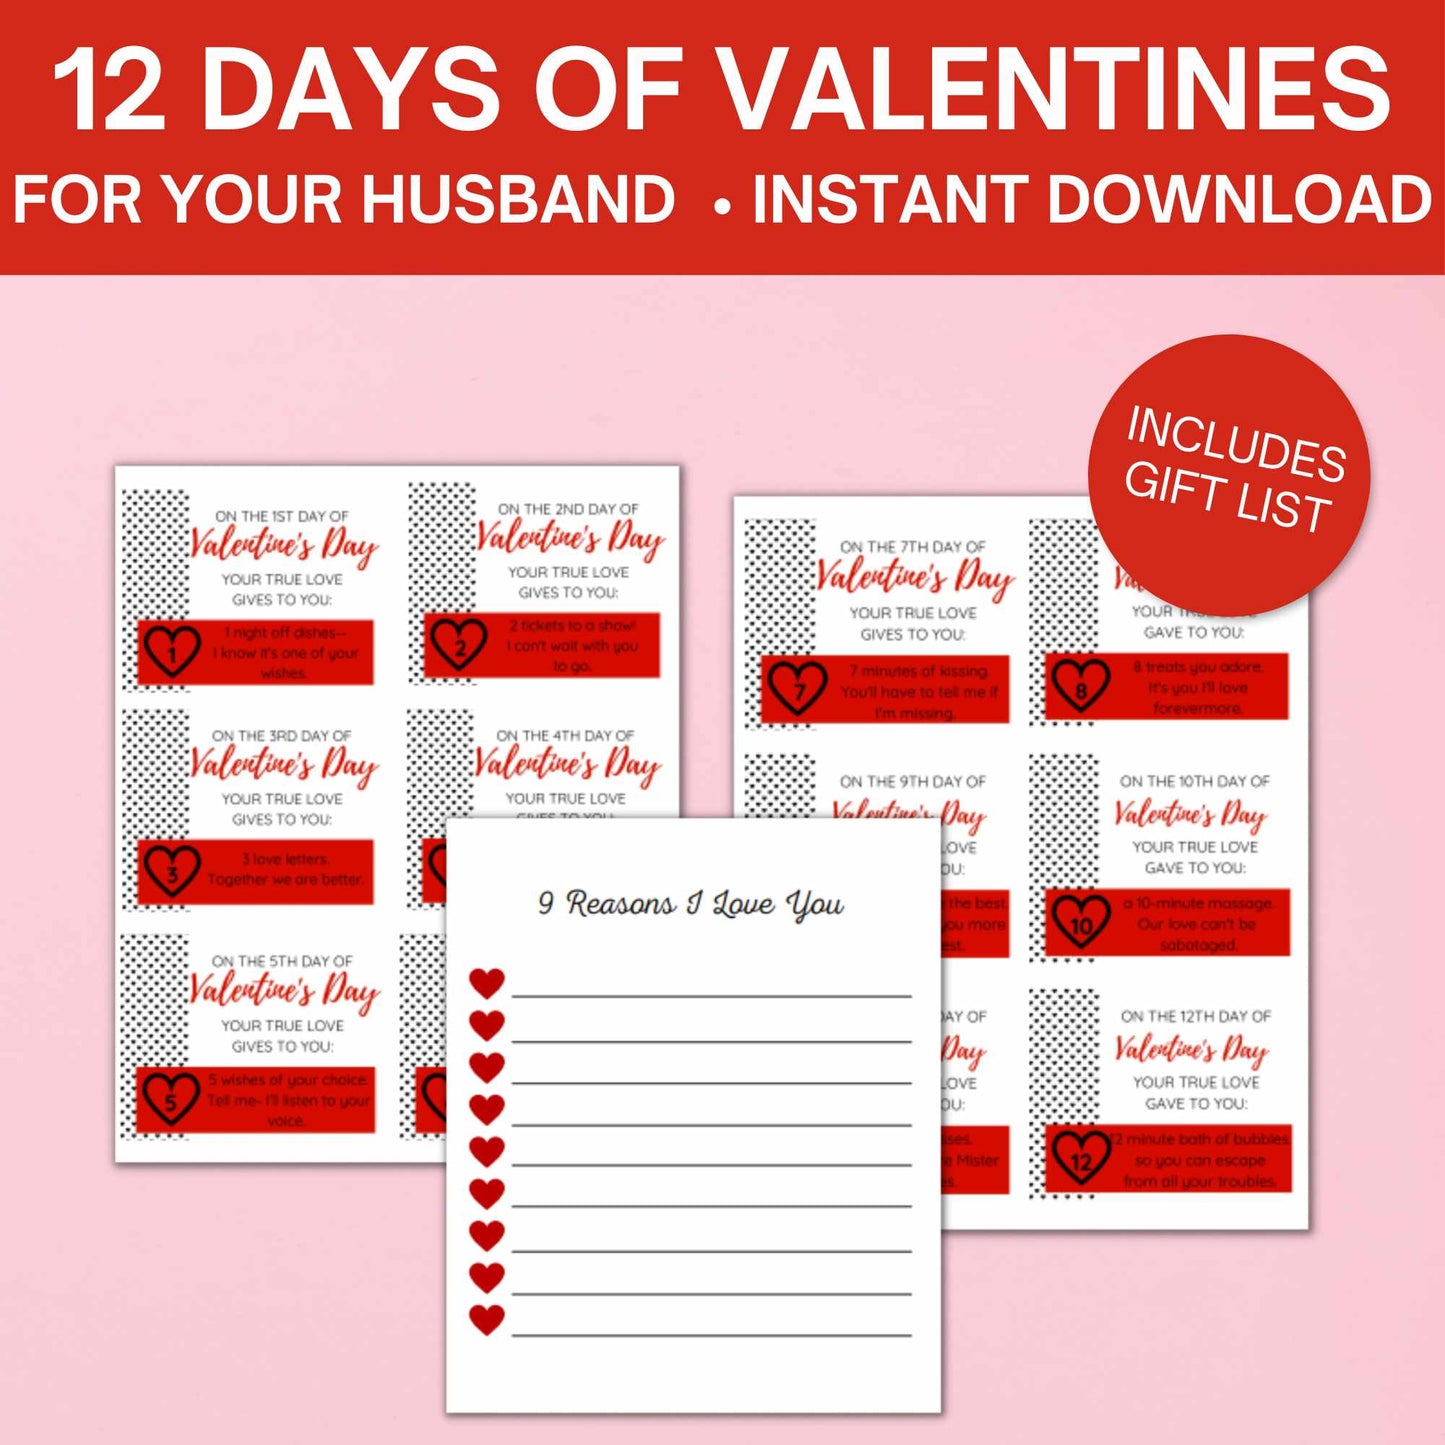 12 Days of Valentines For Your Spouse